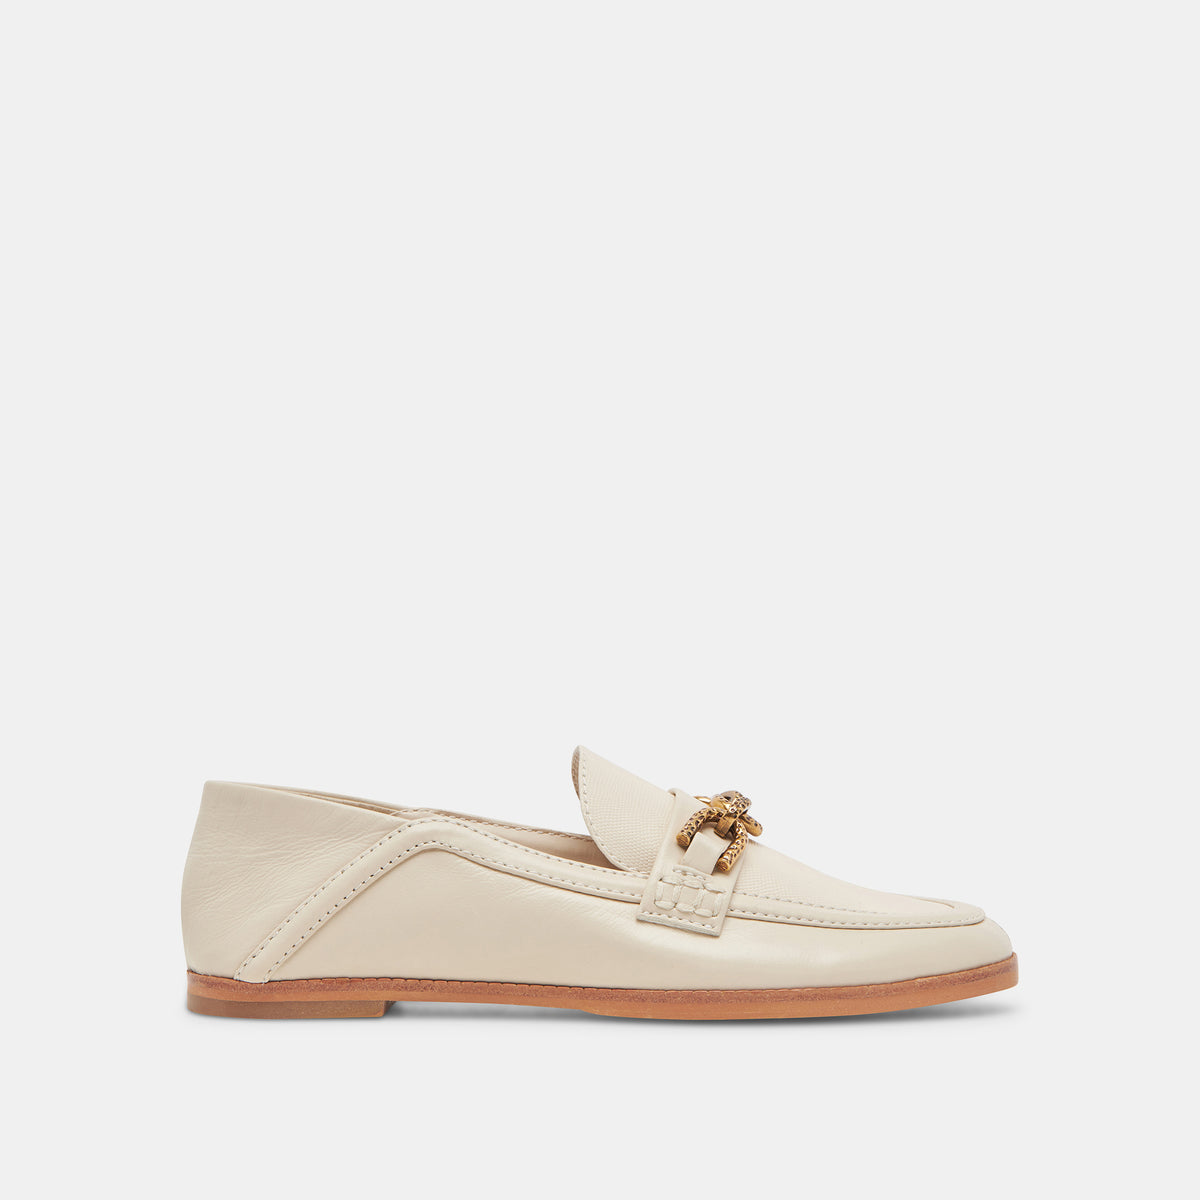 REIGN FLATS IVORY LEATHER – Dolce Vita